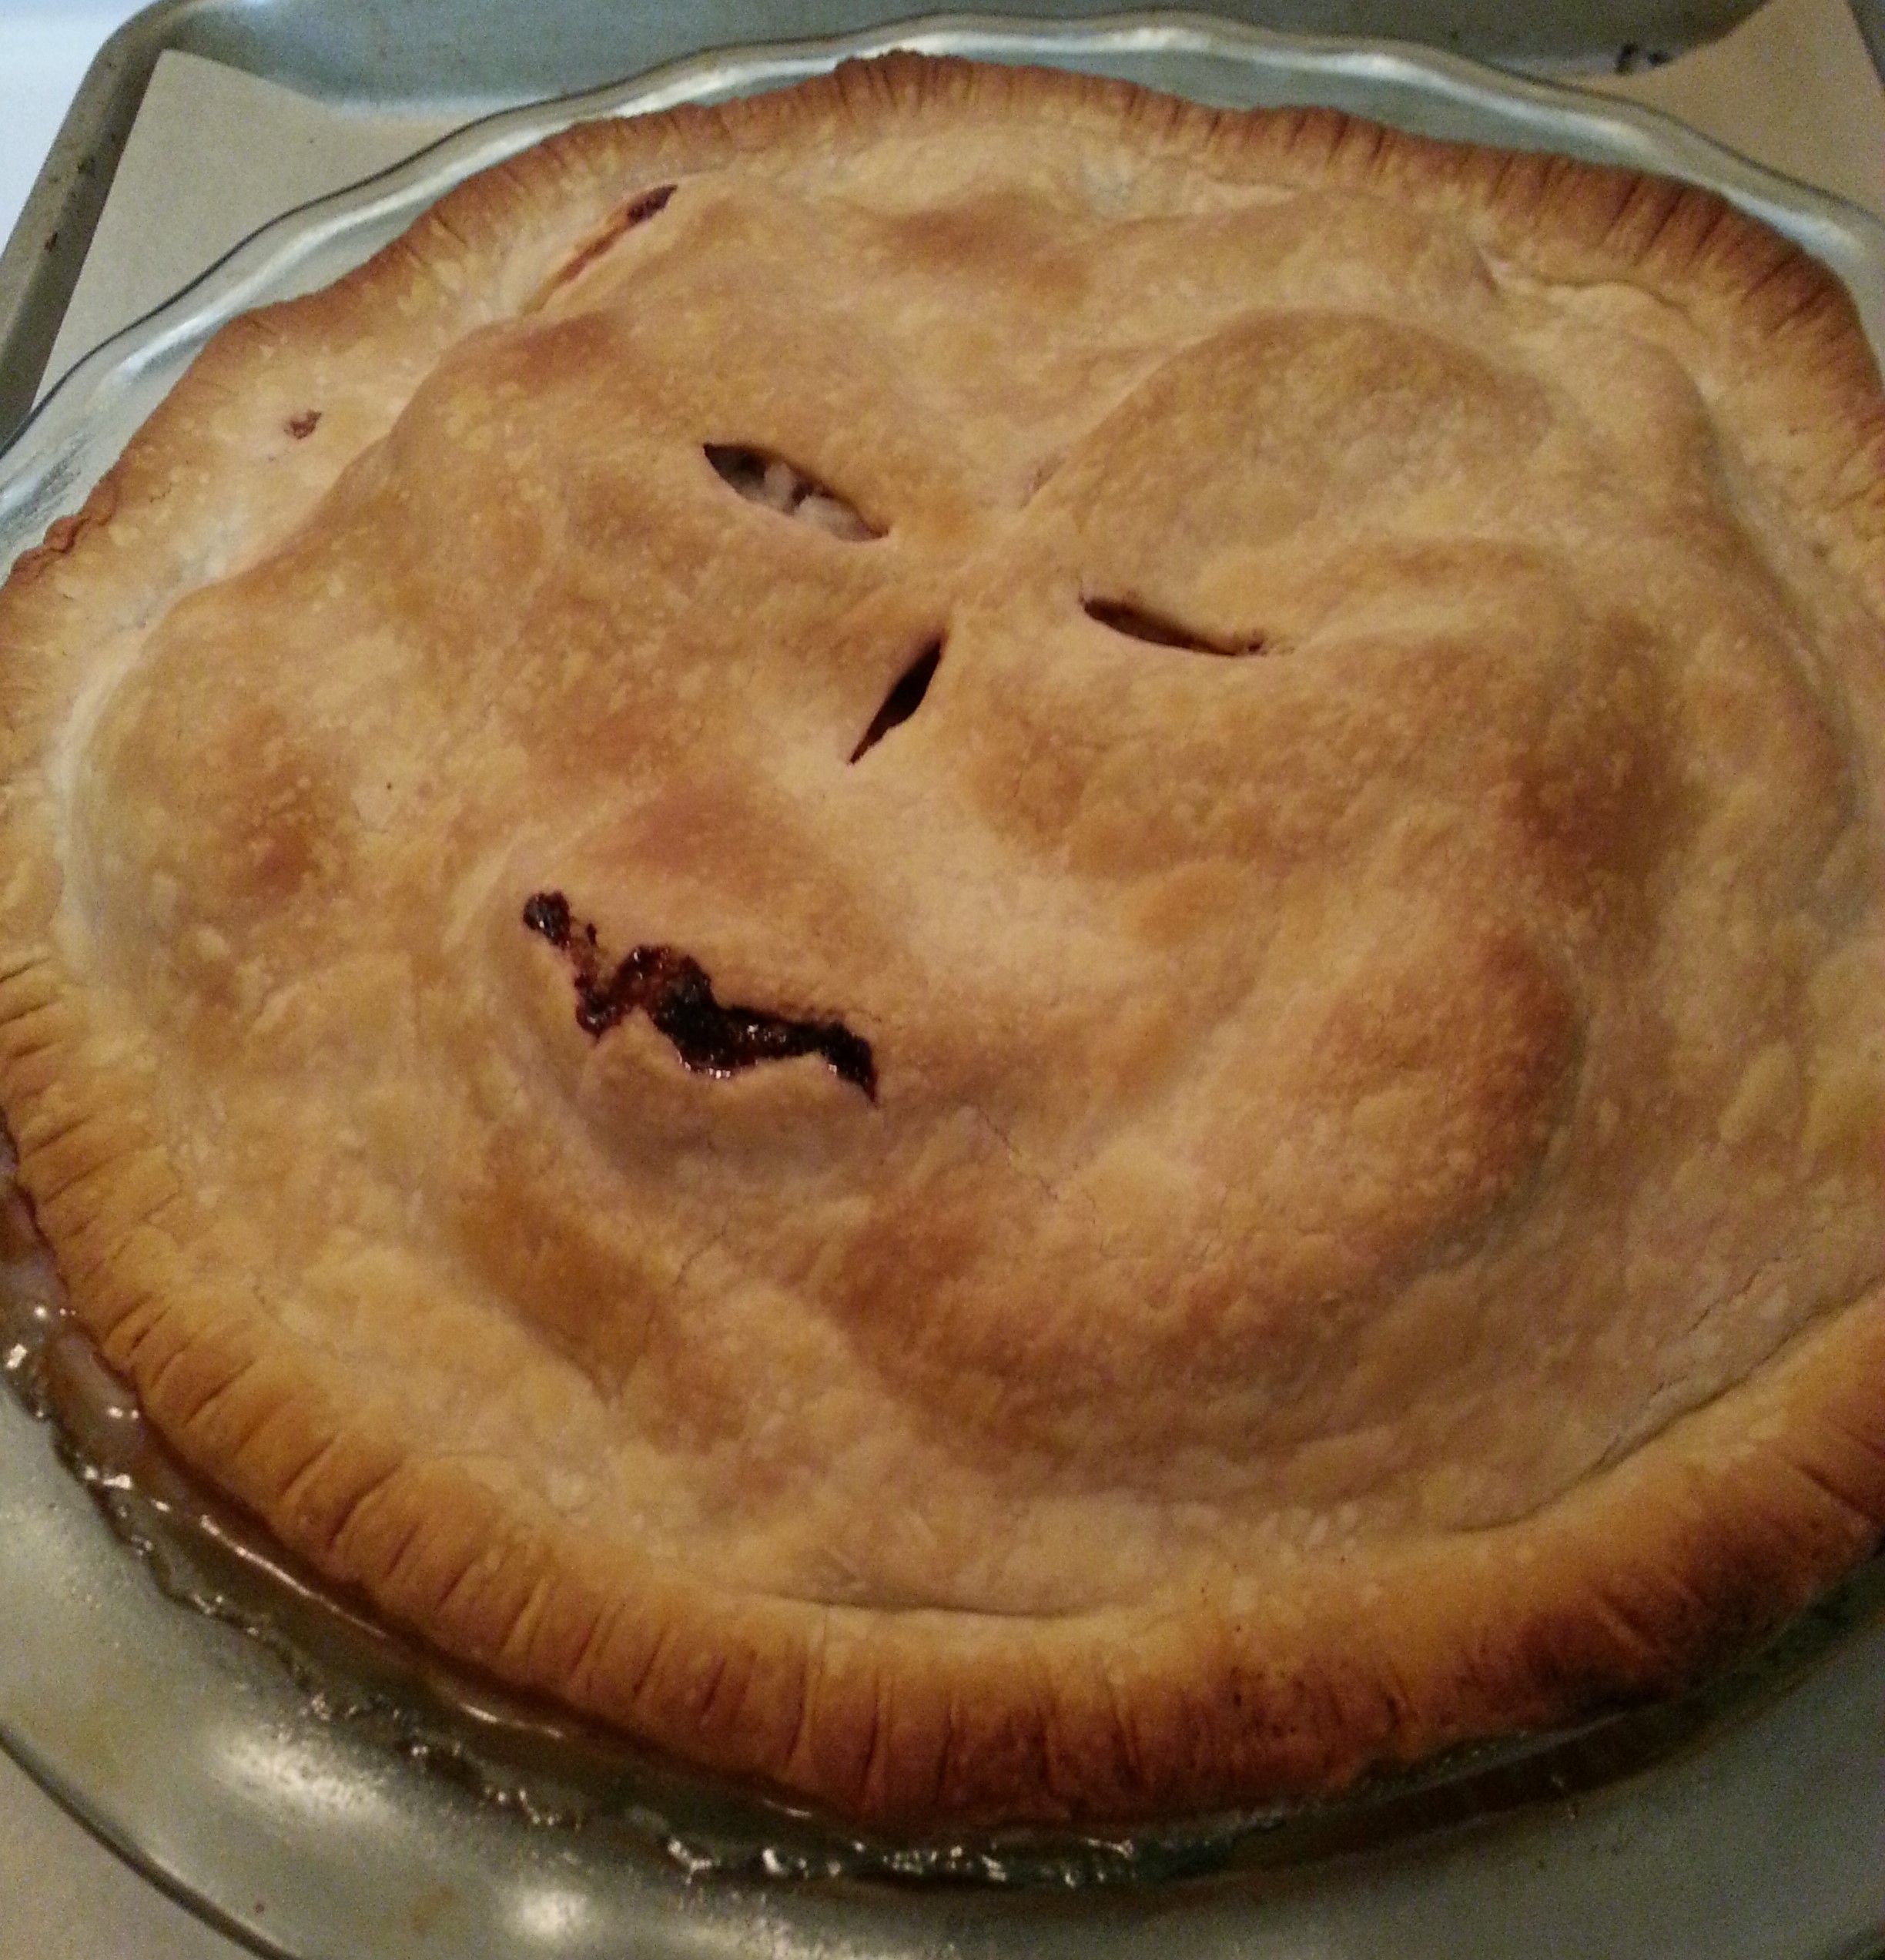 Tried baking a pie. Ended up baking the Necronomicon.